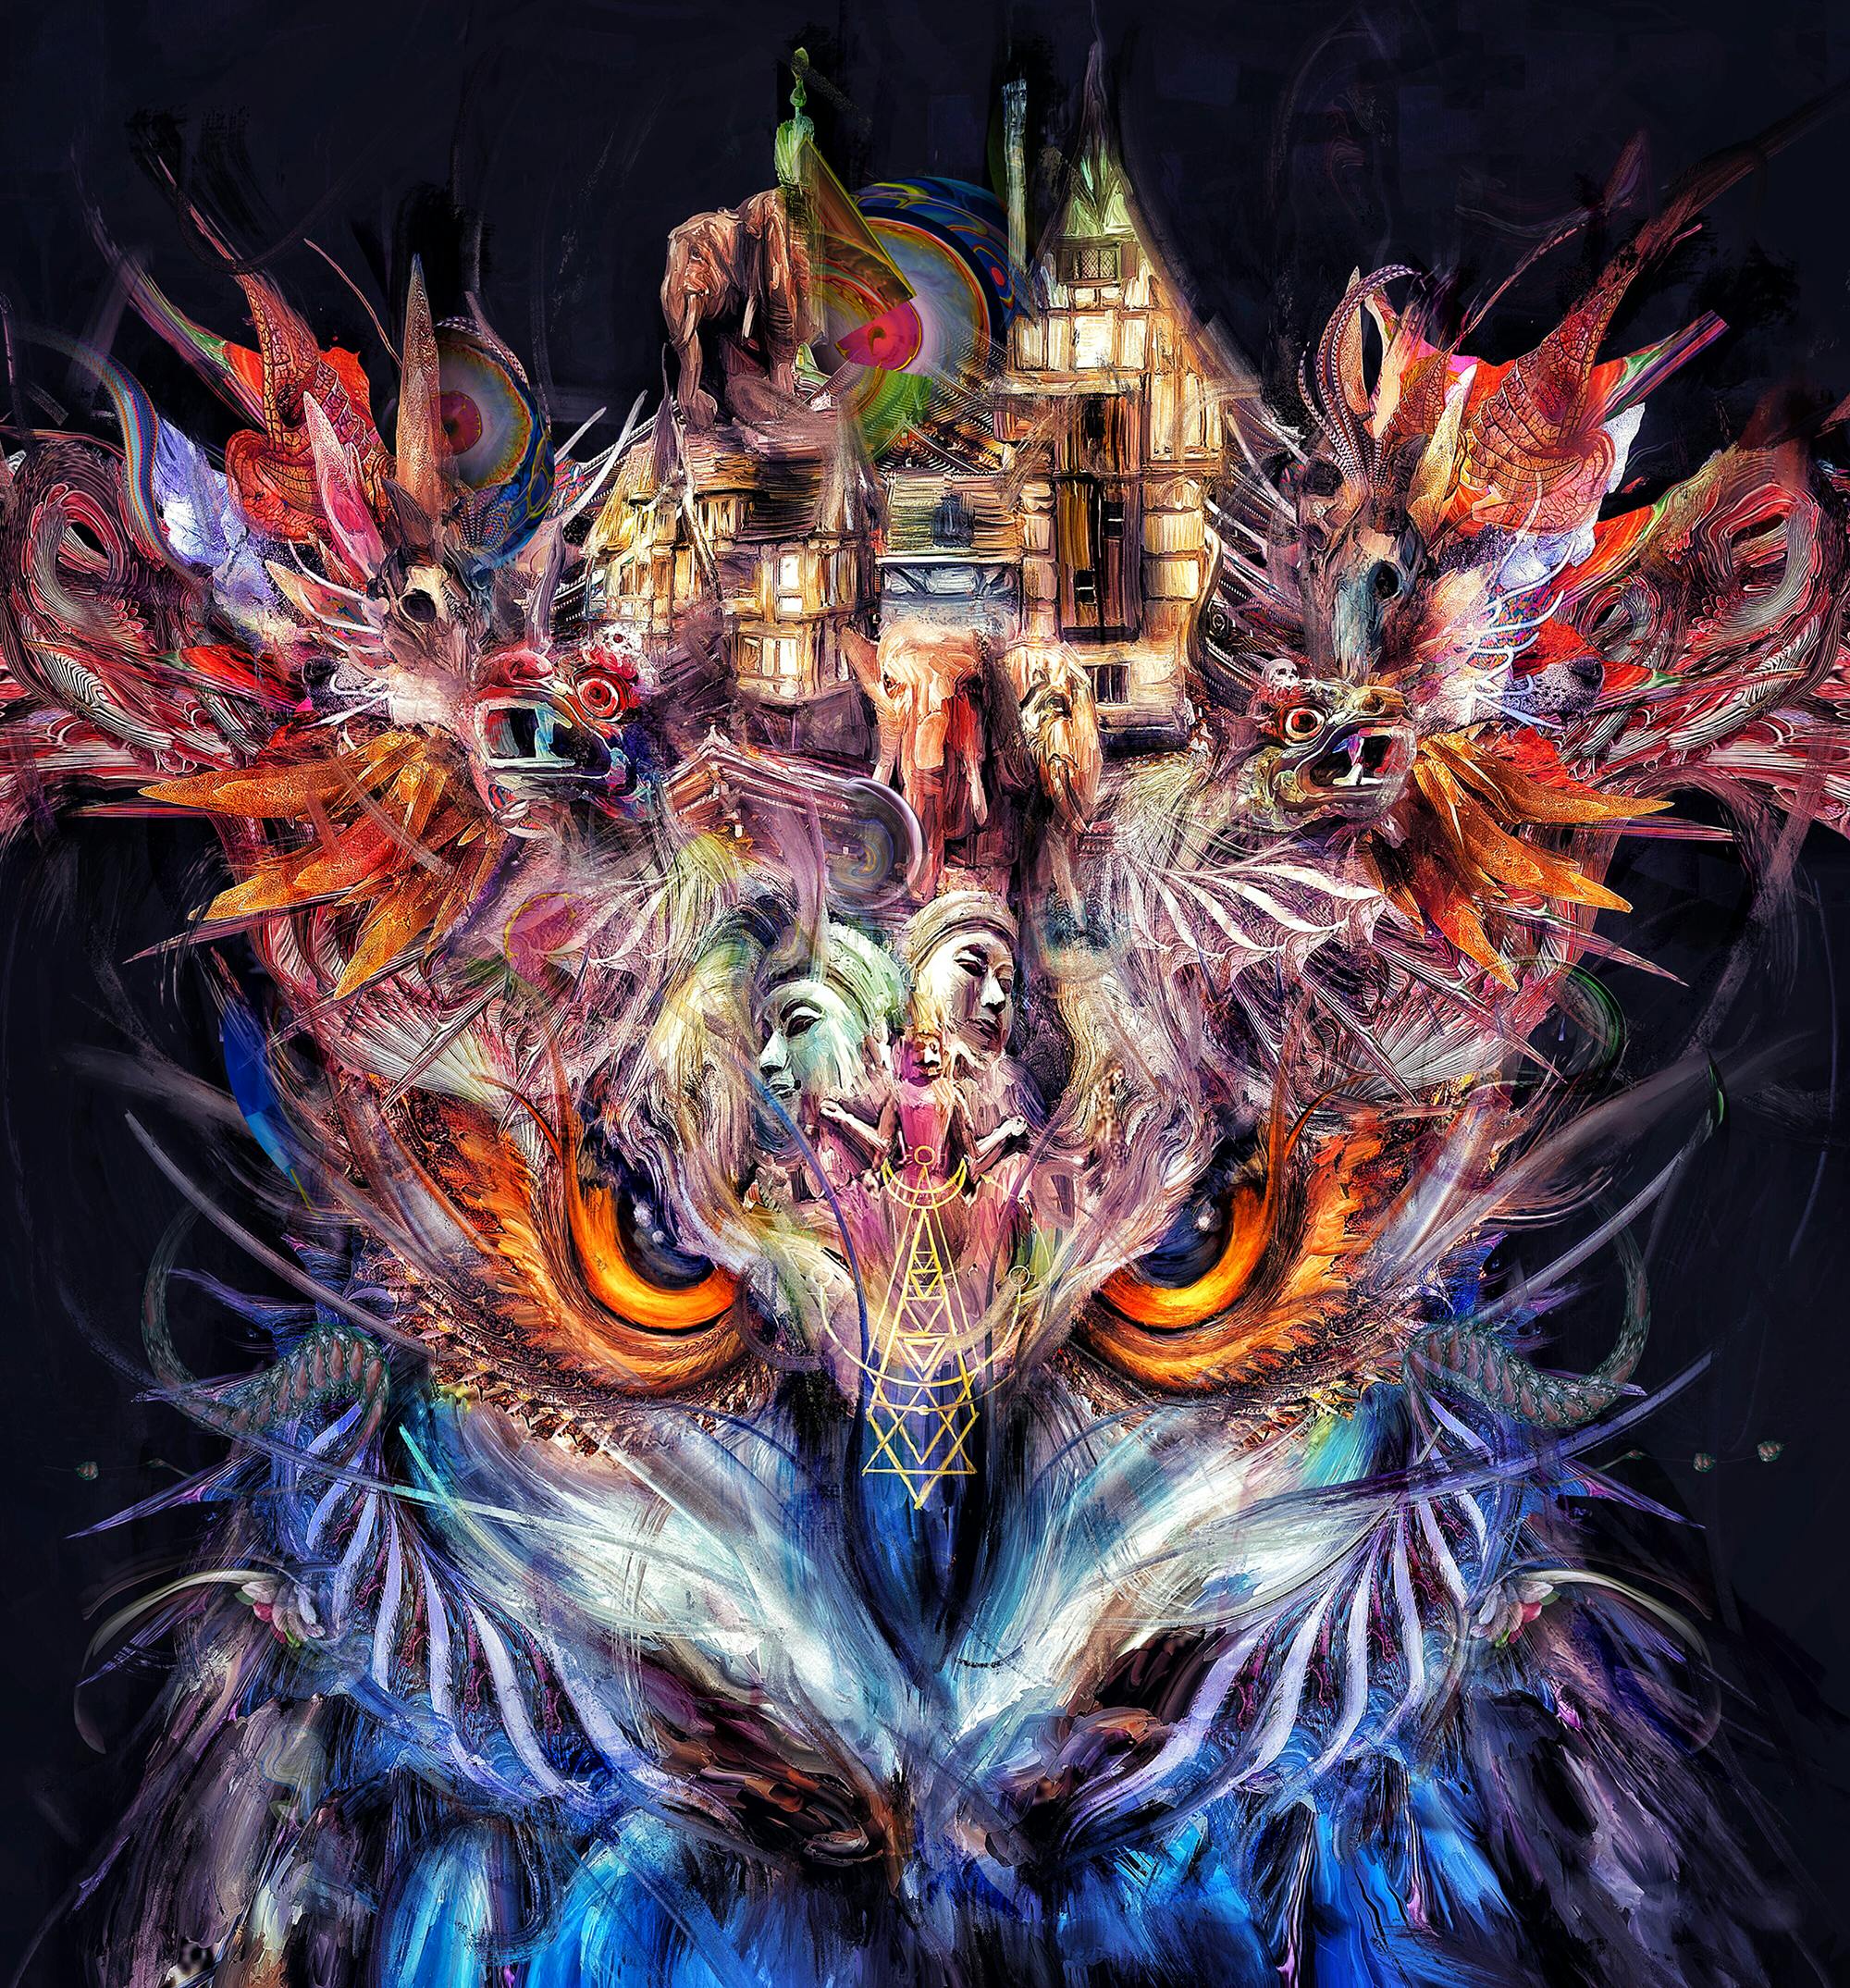 Cover Image for "Encoded" by Archan Nair